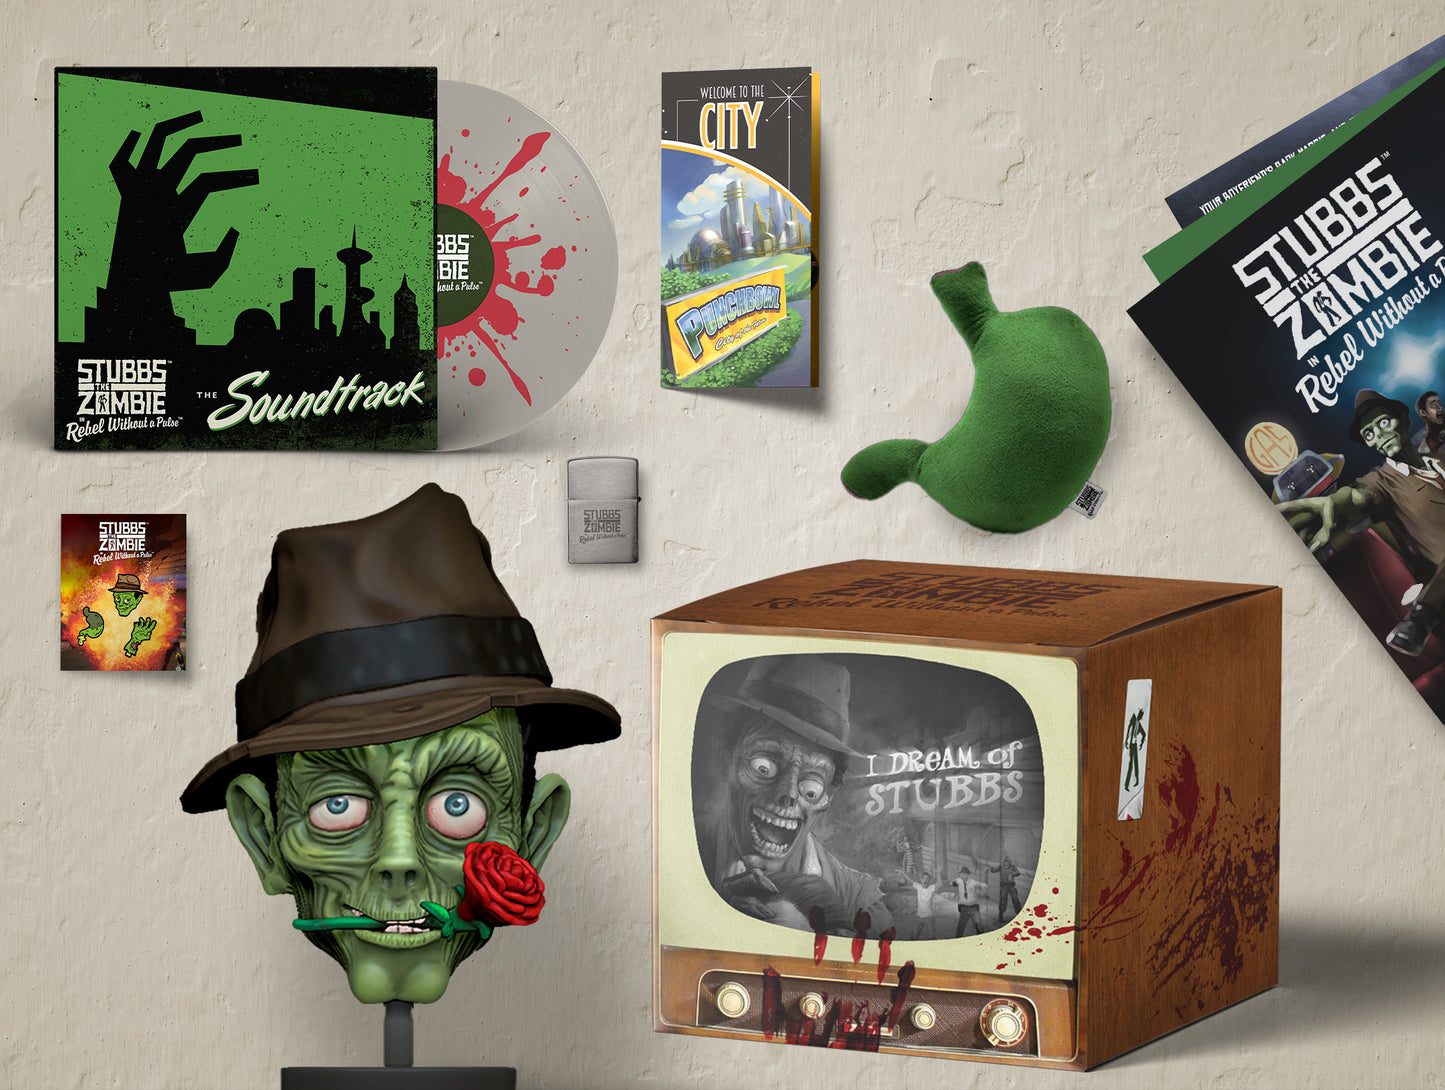 Stubbs The Zombie in Rebel Without a Pulse I Dream of Stubbs Collector’s Edition (PlayStation 4)